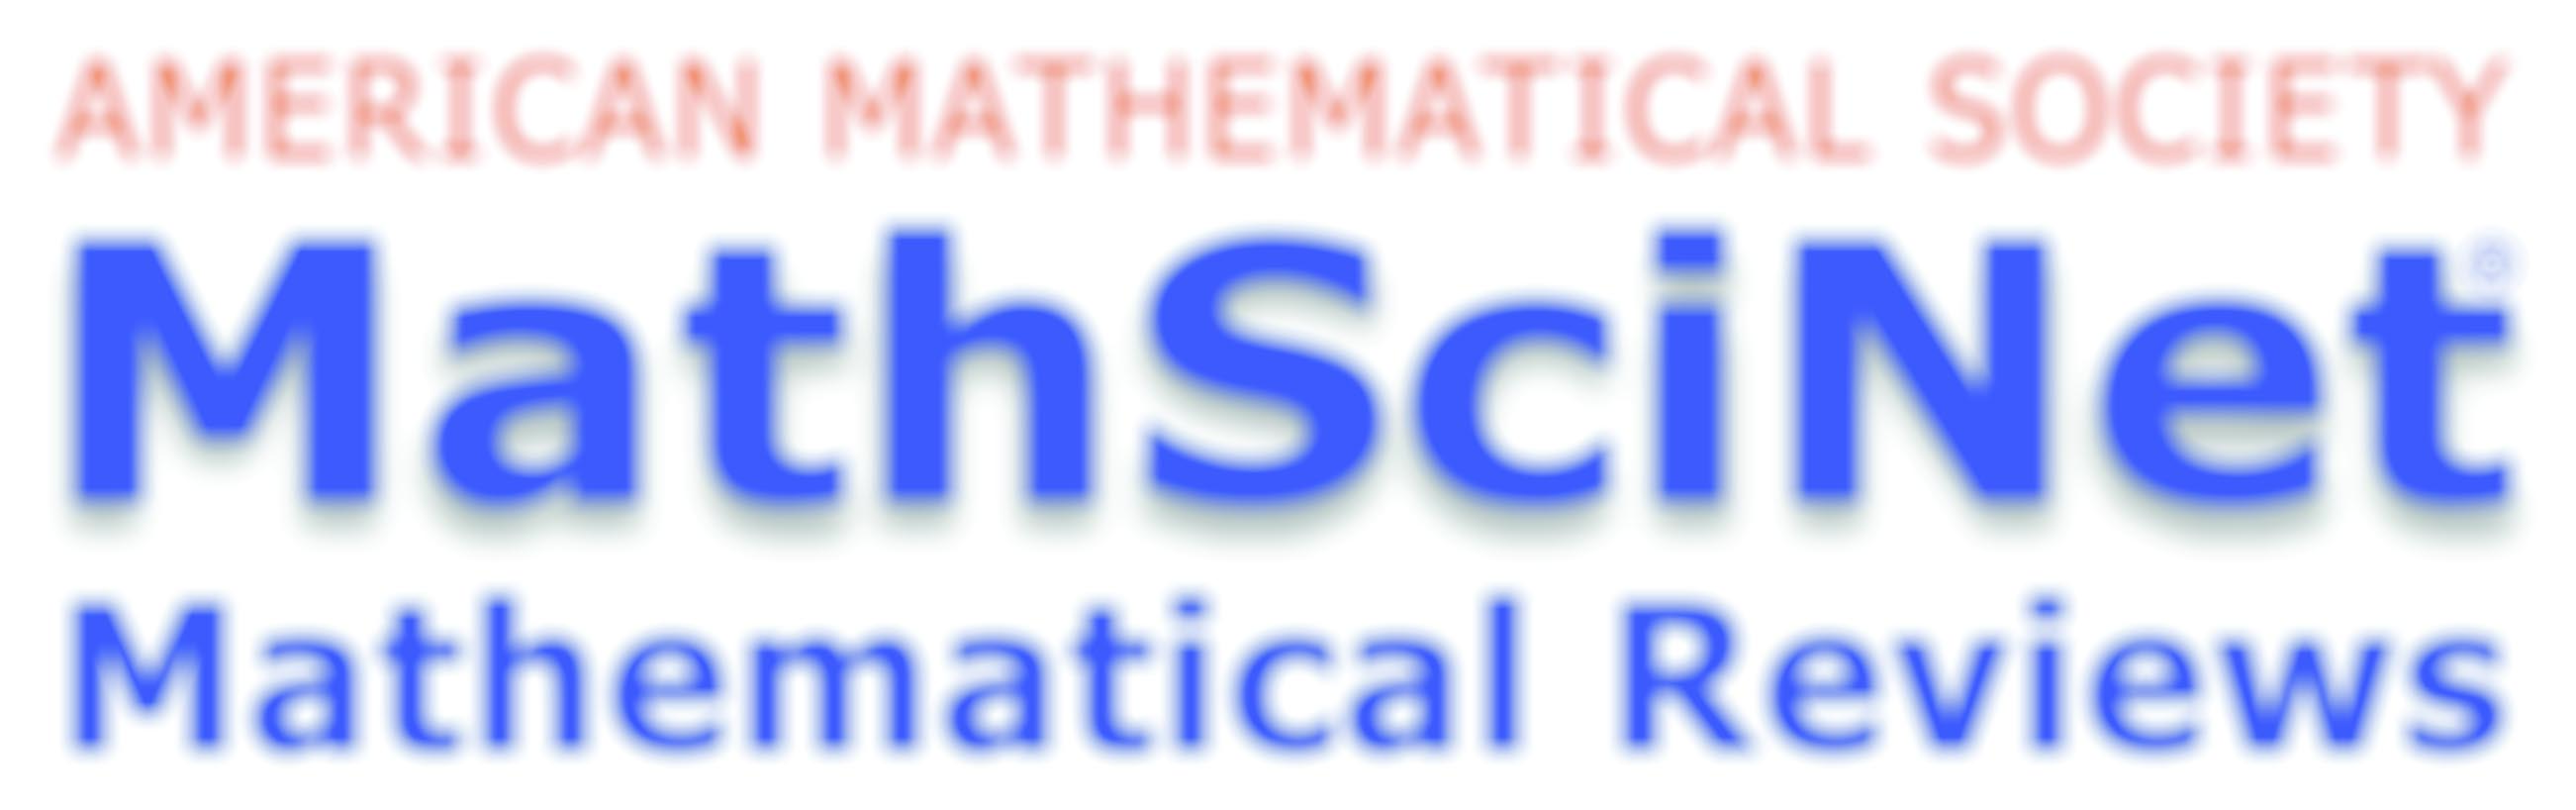 MathSciNet 2017 Subscription Has Started!